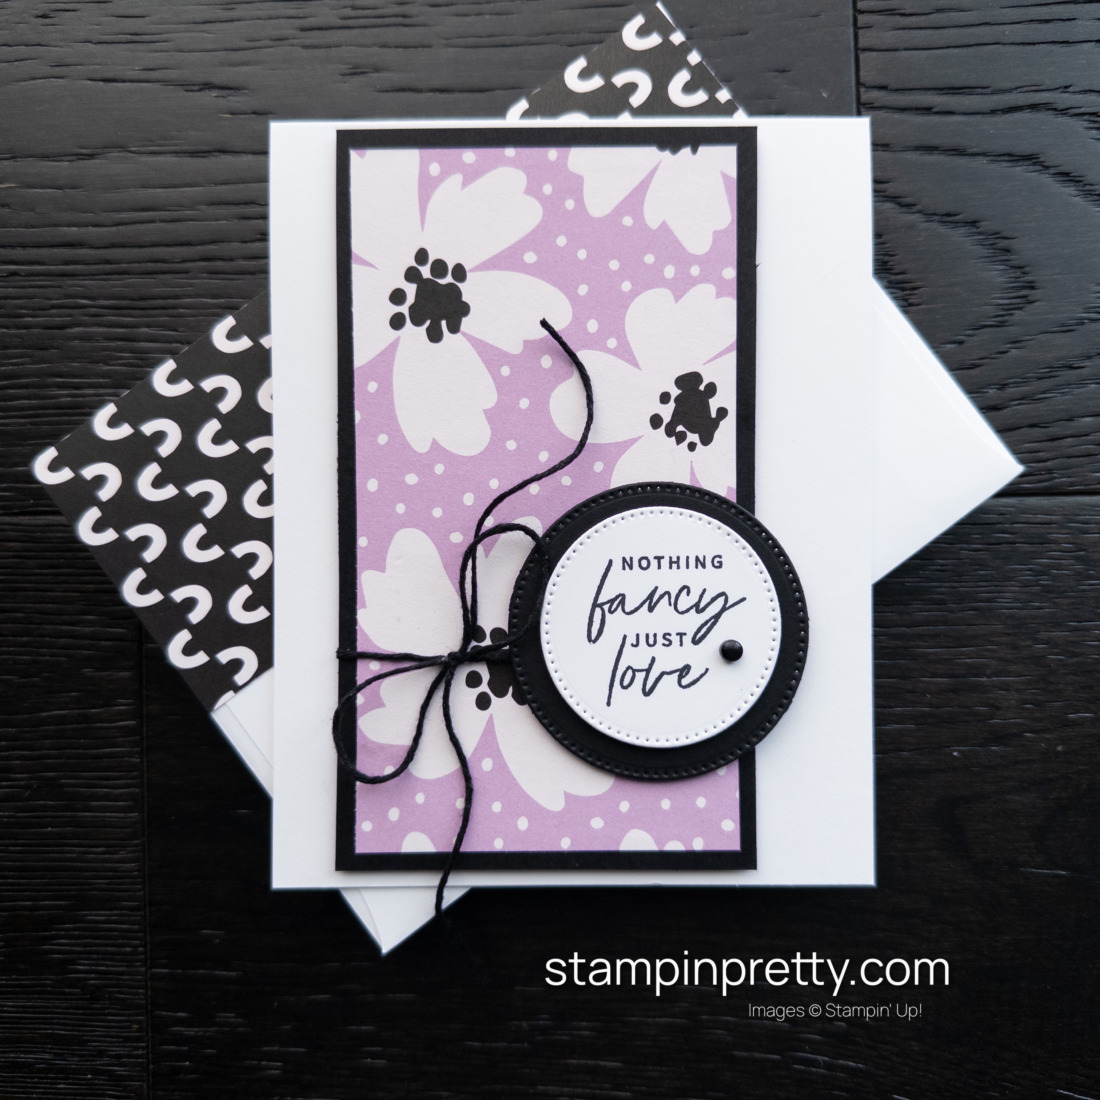 Create a friend card using the Delightfully Eclectic Designer Series Paper from Stampin' Up! Card design by Mary Fish, Stampin' Pretty